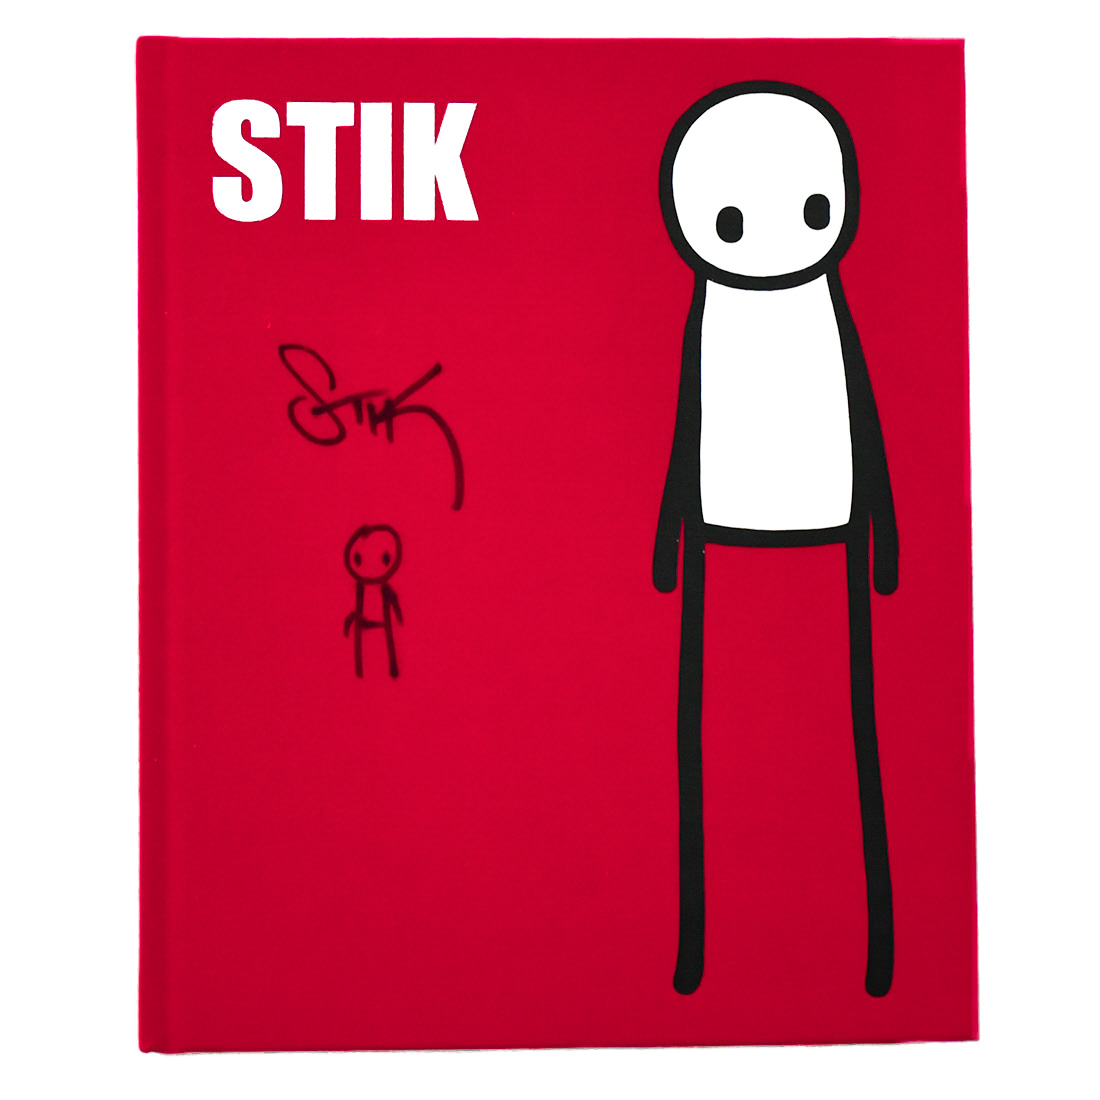 artist stik book signed with hand drawn figure on cover